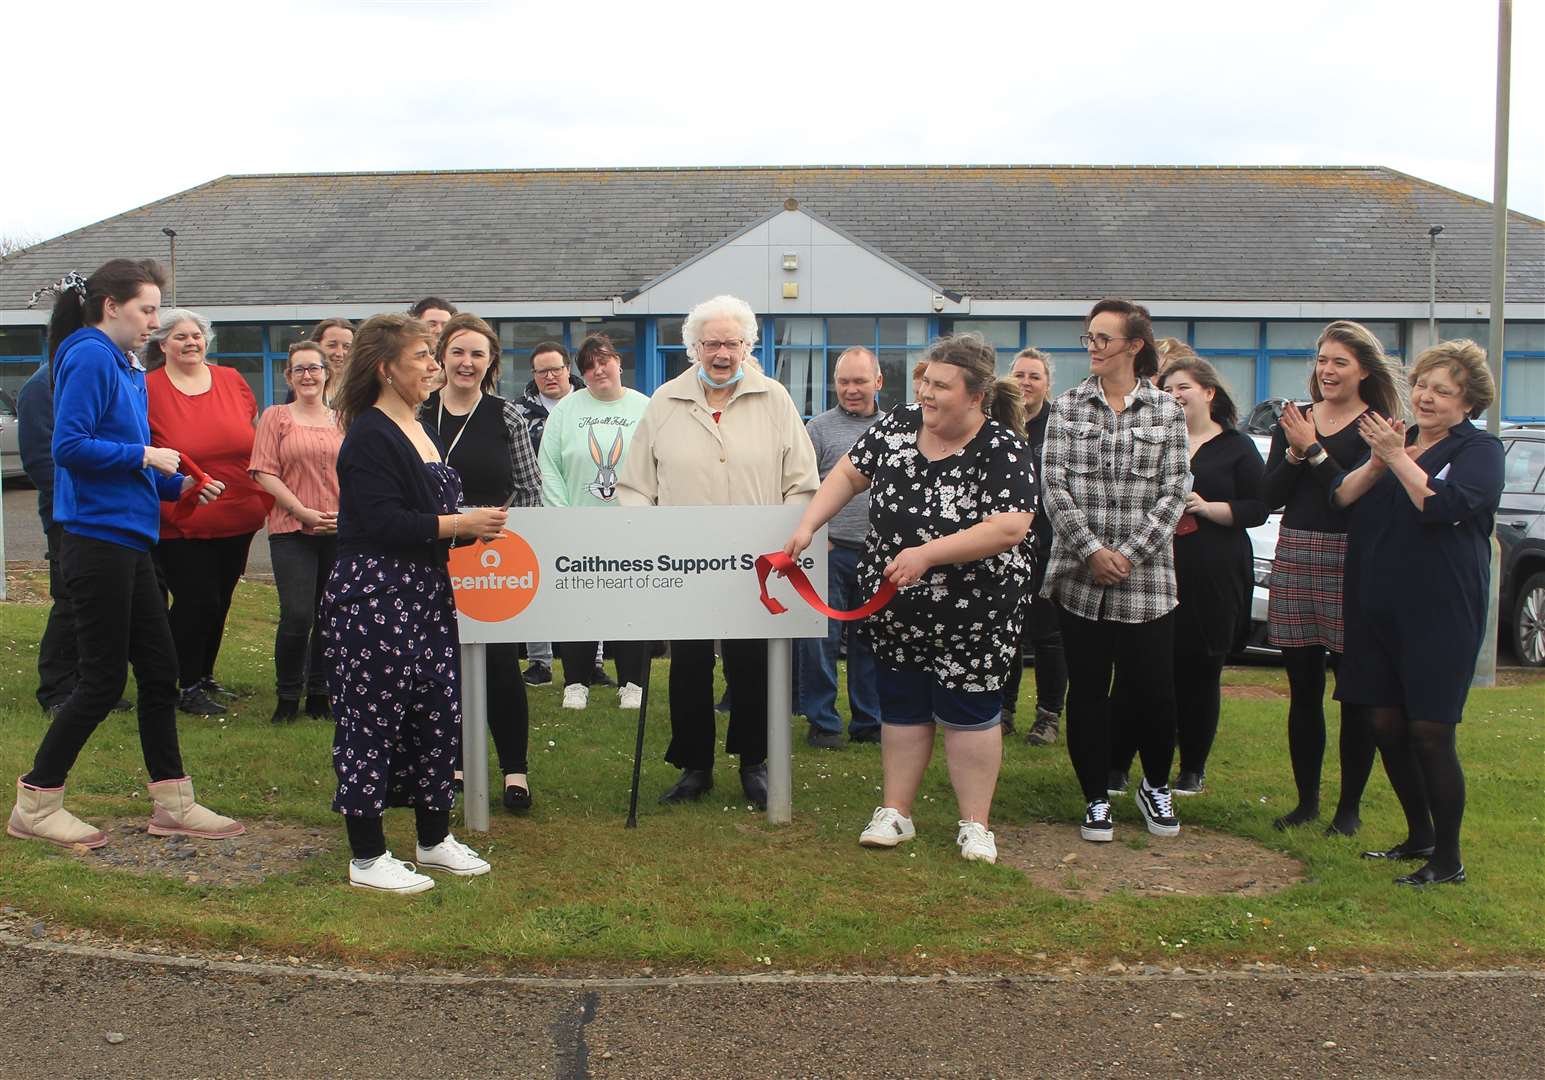 Amiee Marks (front, left) cutting the ribbon along with Kelsie O'Brien (front, right) and Stacy McIntosh (left), watched by staff and guests outside the Centred base in Wick on Friday.